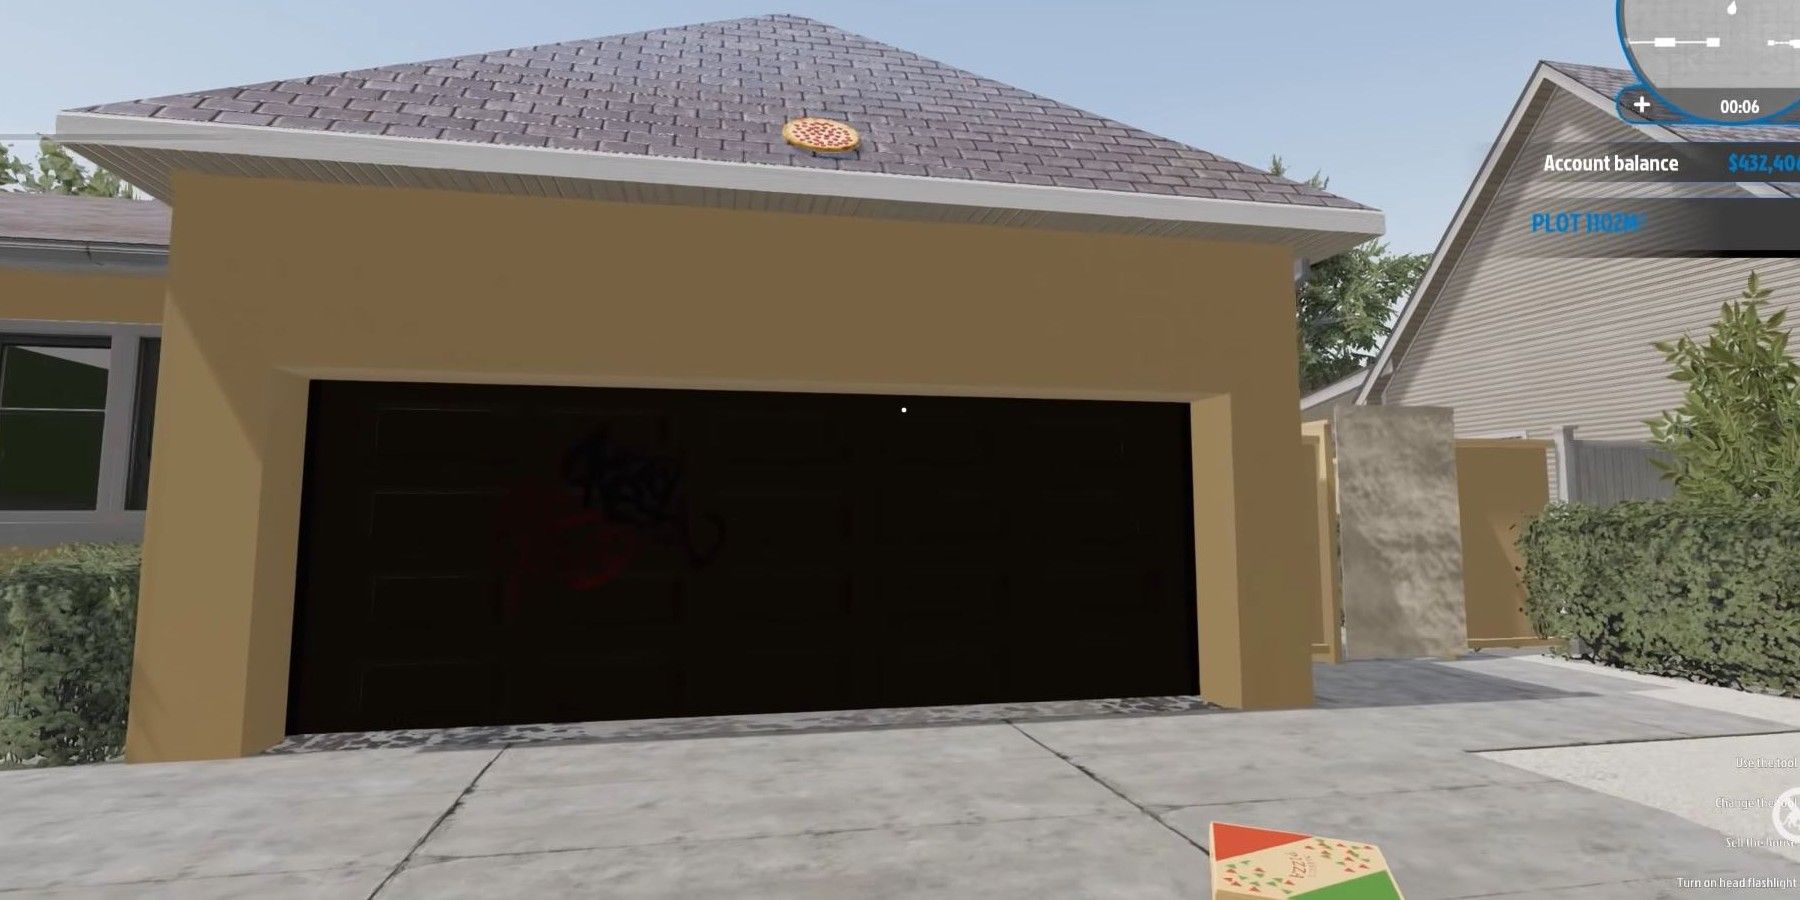 House Flipper S Breaking Bad Home Alone References Explained Informone - alone in a dark house roblox garage door